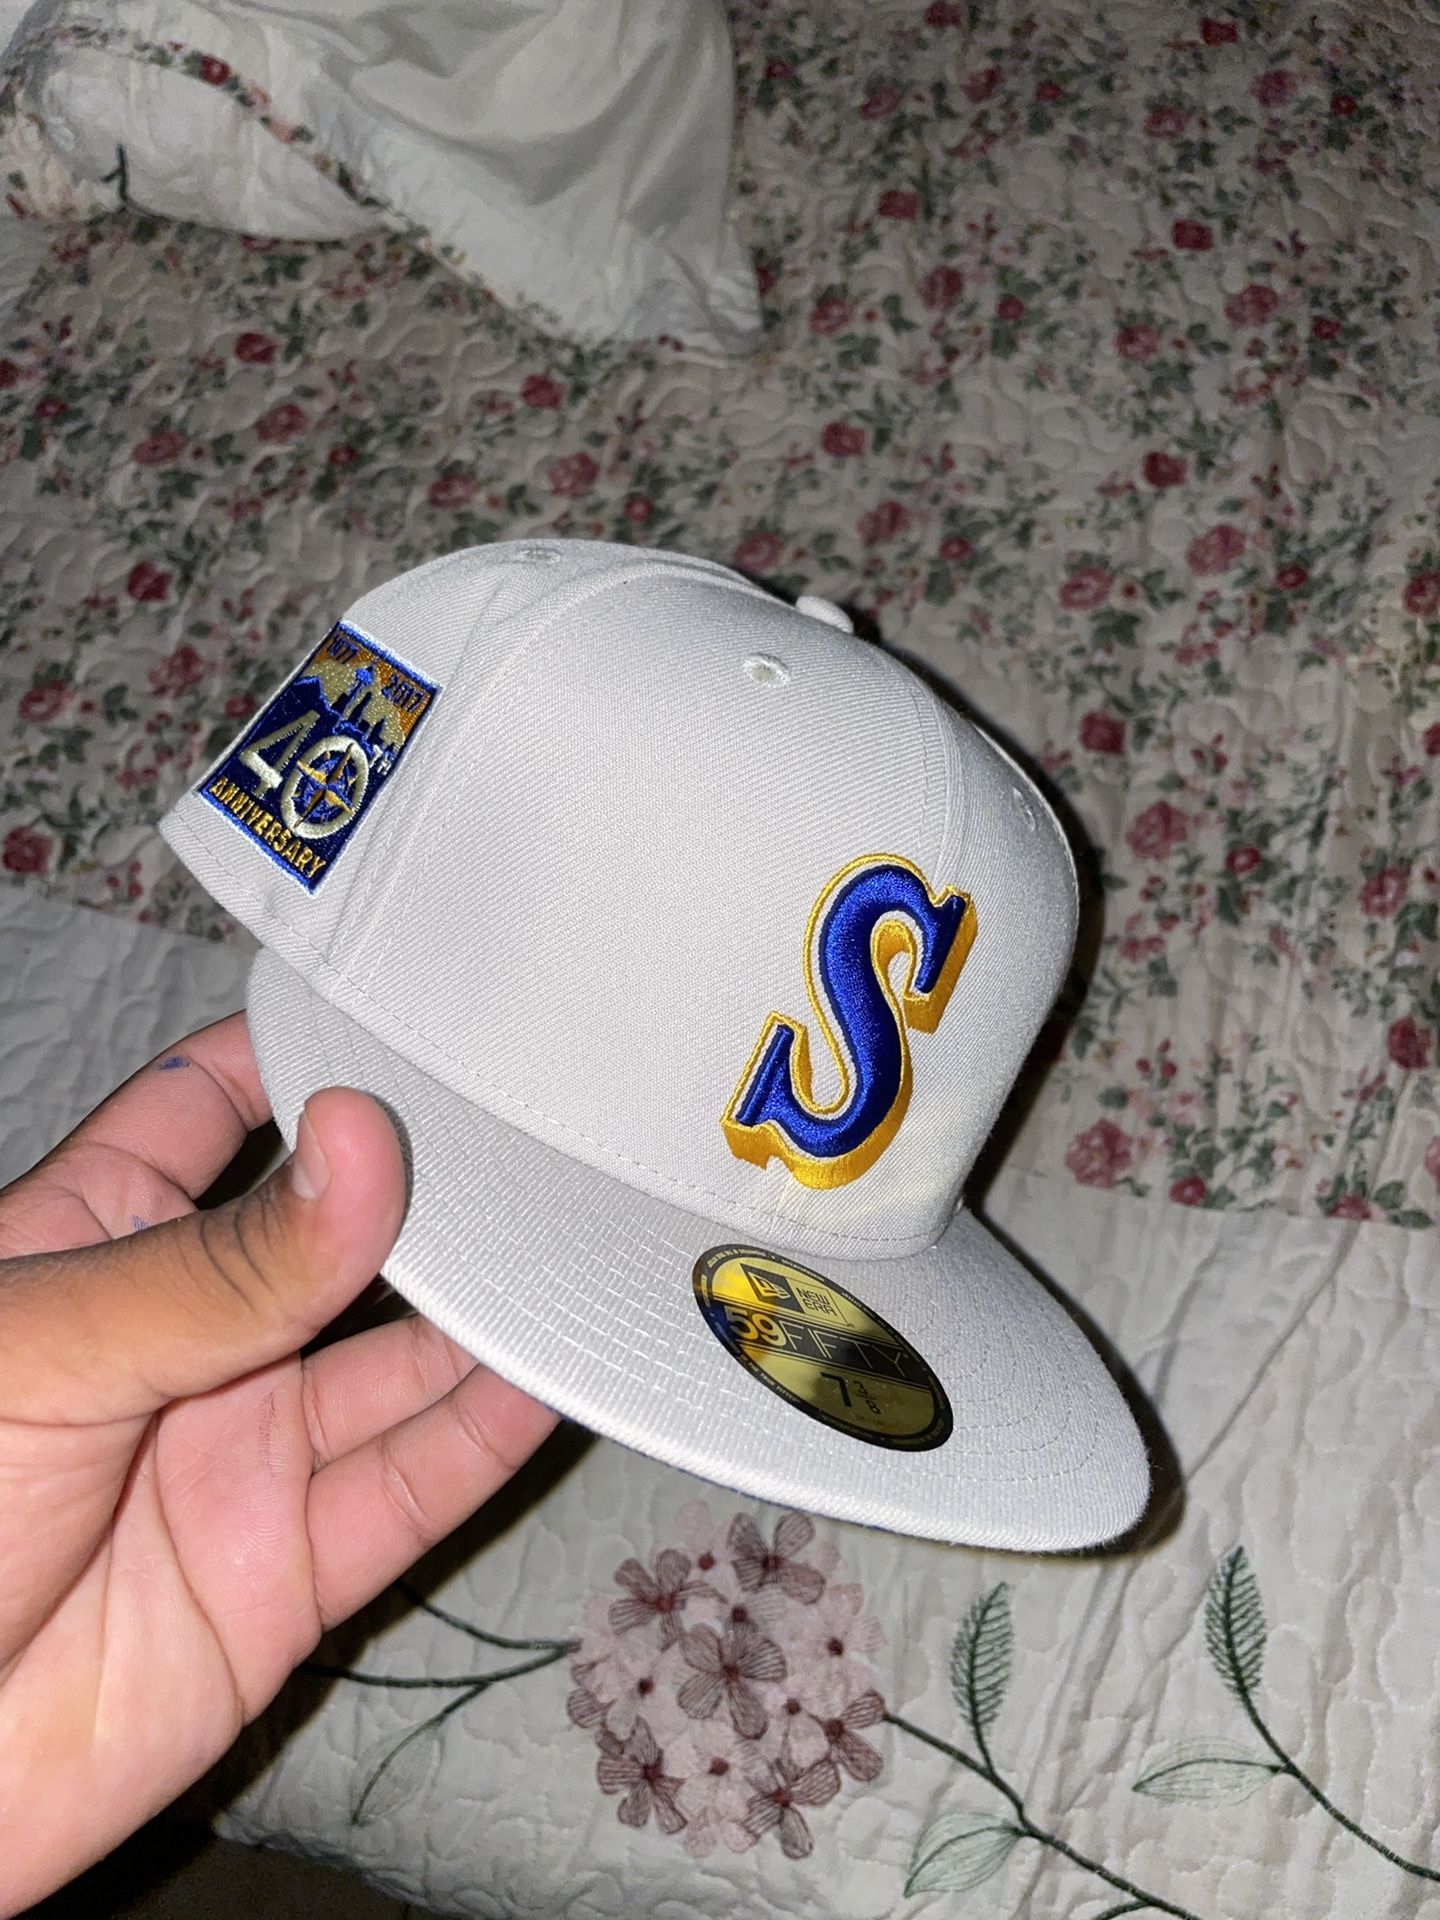 Seattle Mariners Fitted Hat